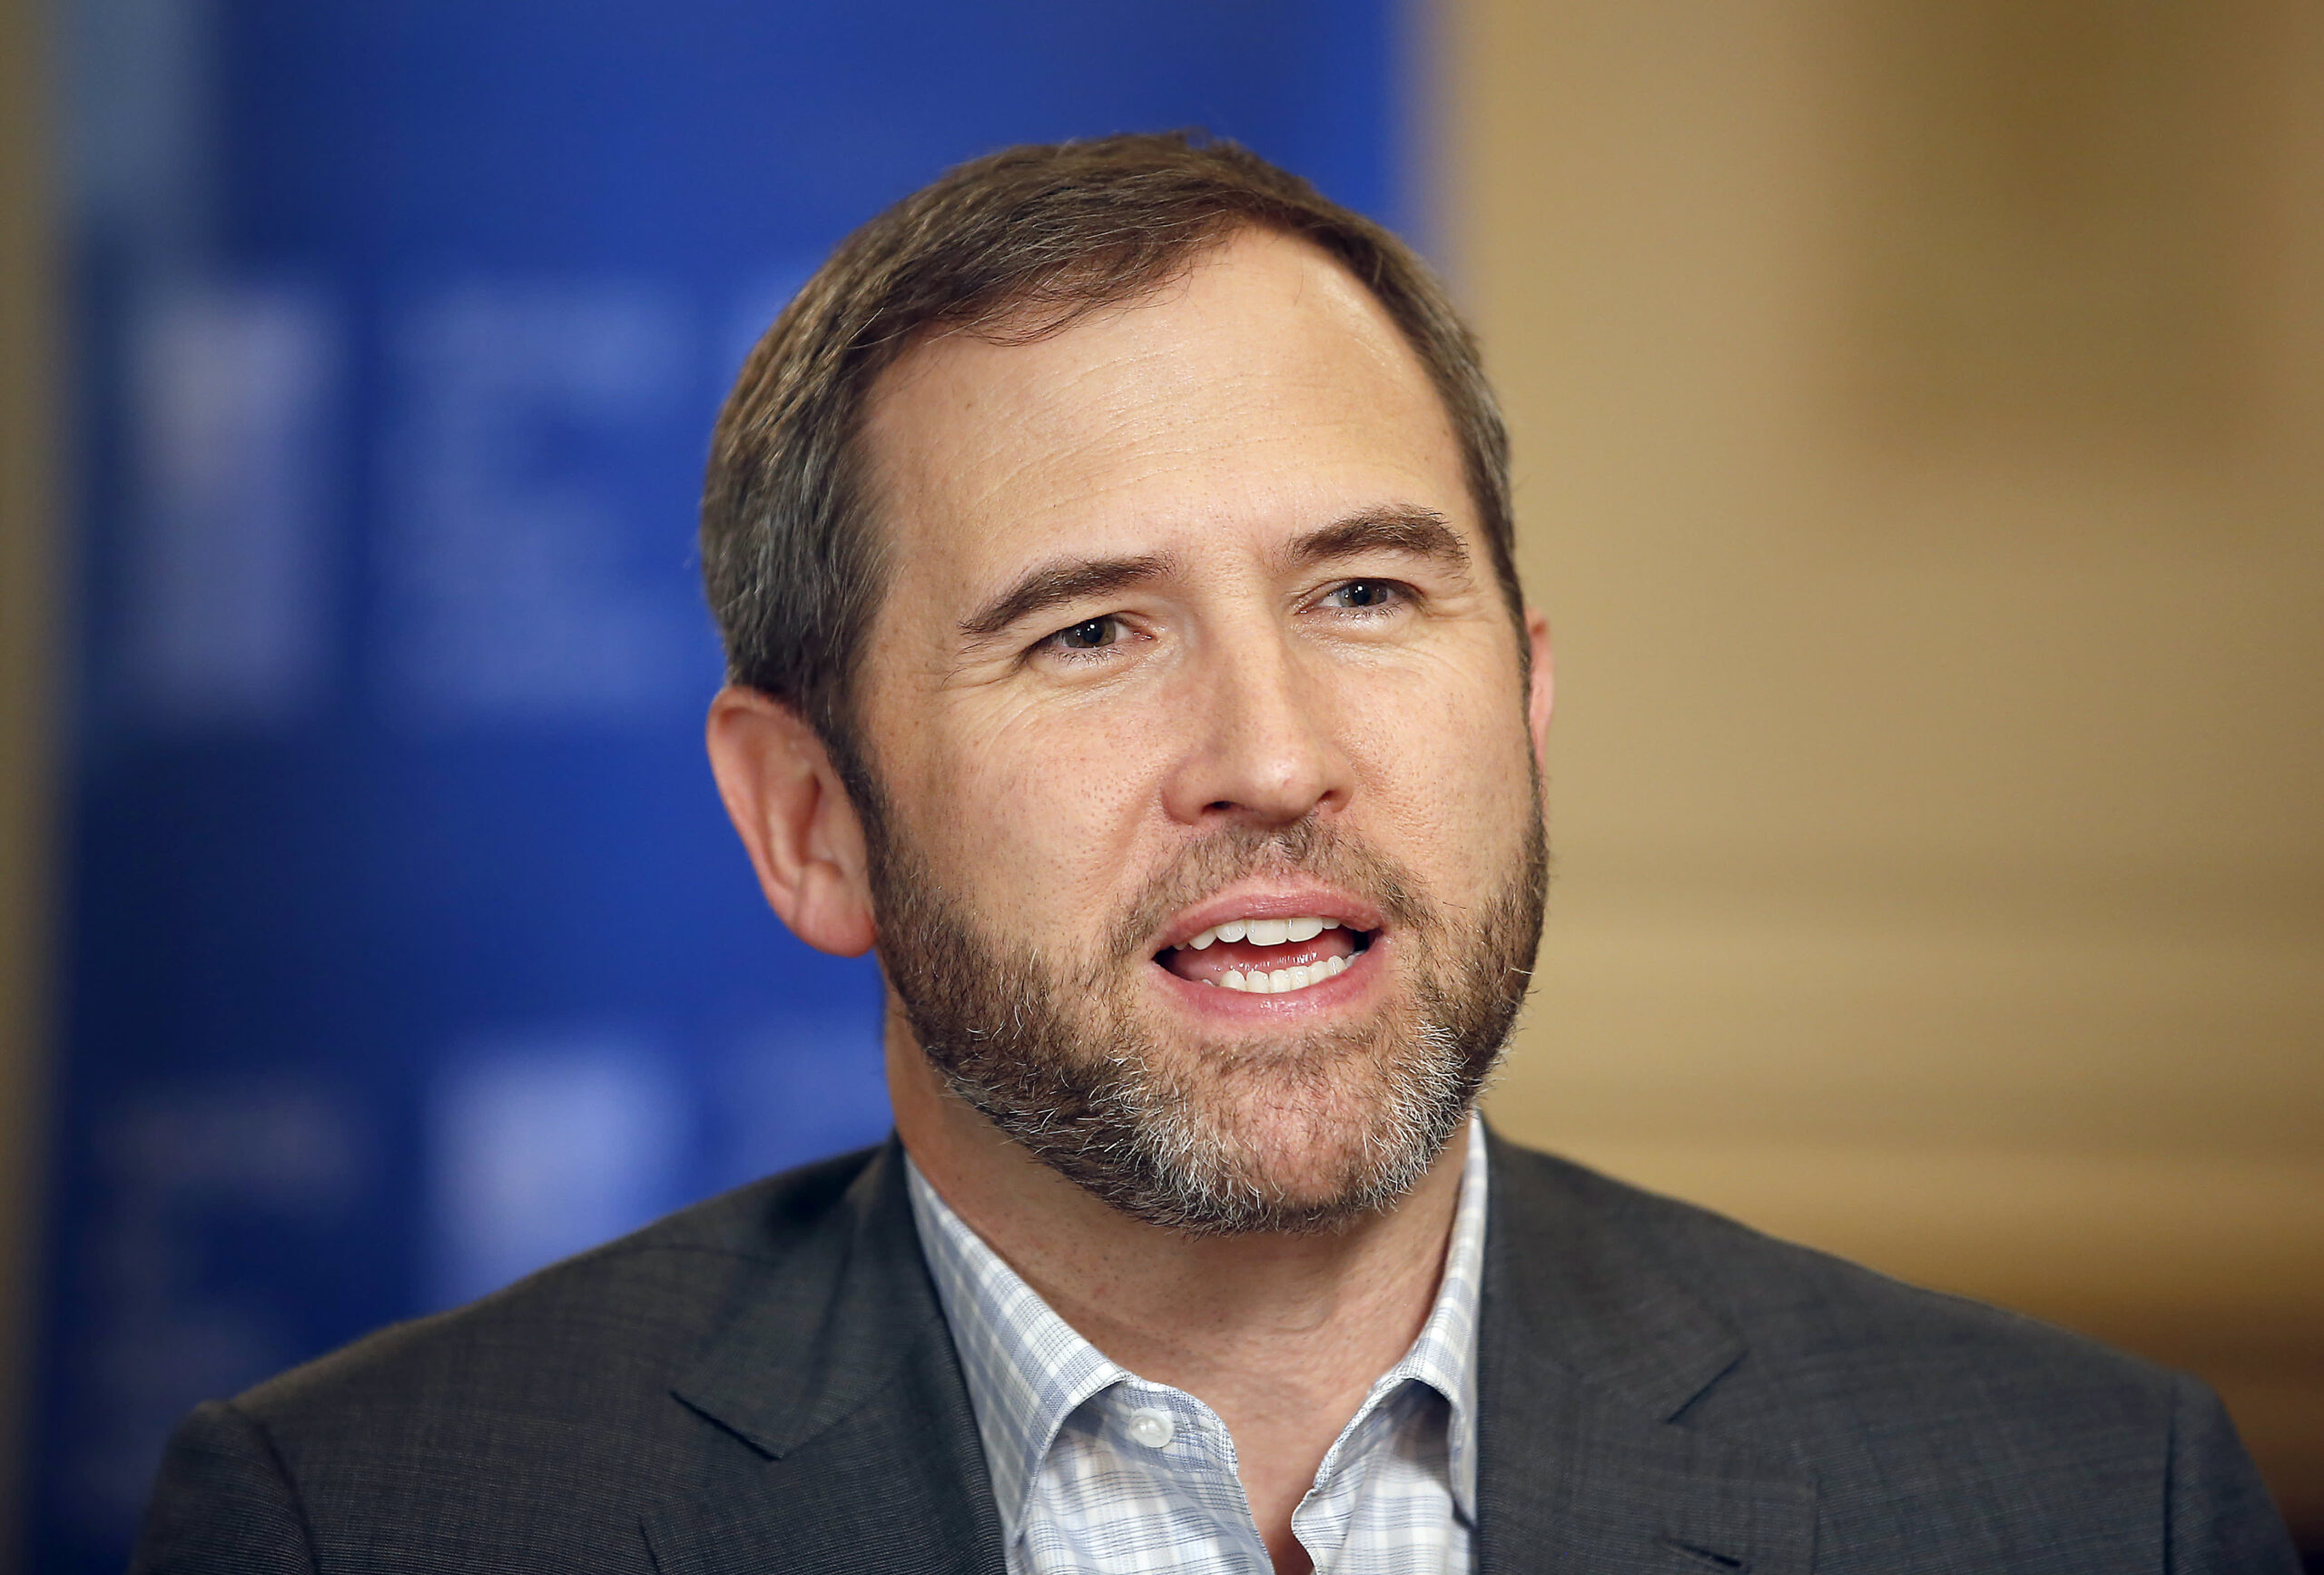 Brad Garlinghouse (CEO of Ripple) Crypto Influencer, Net Worth, Wife